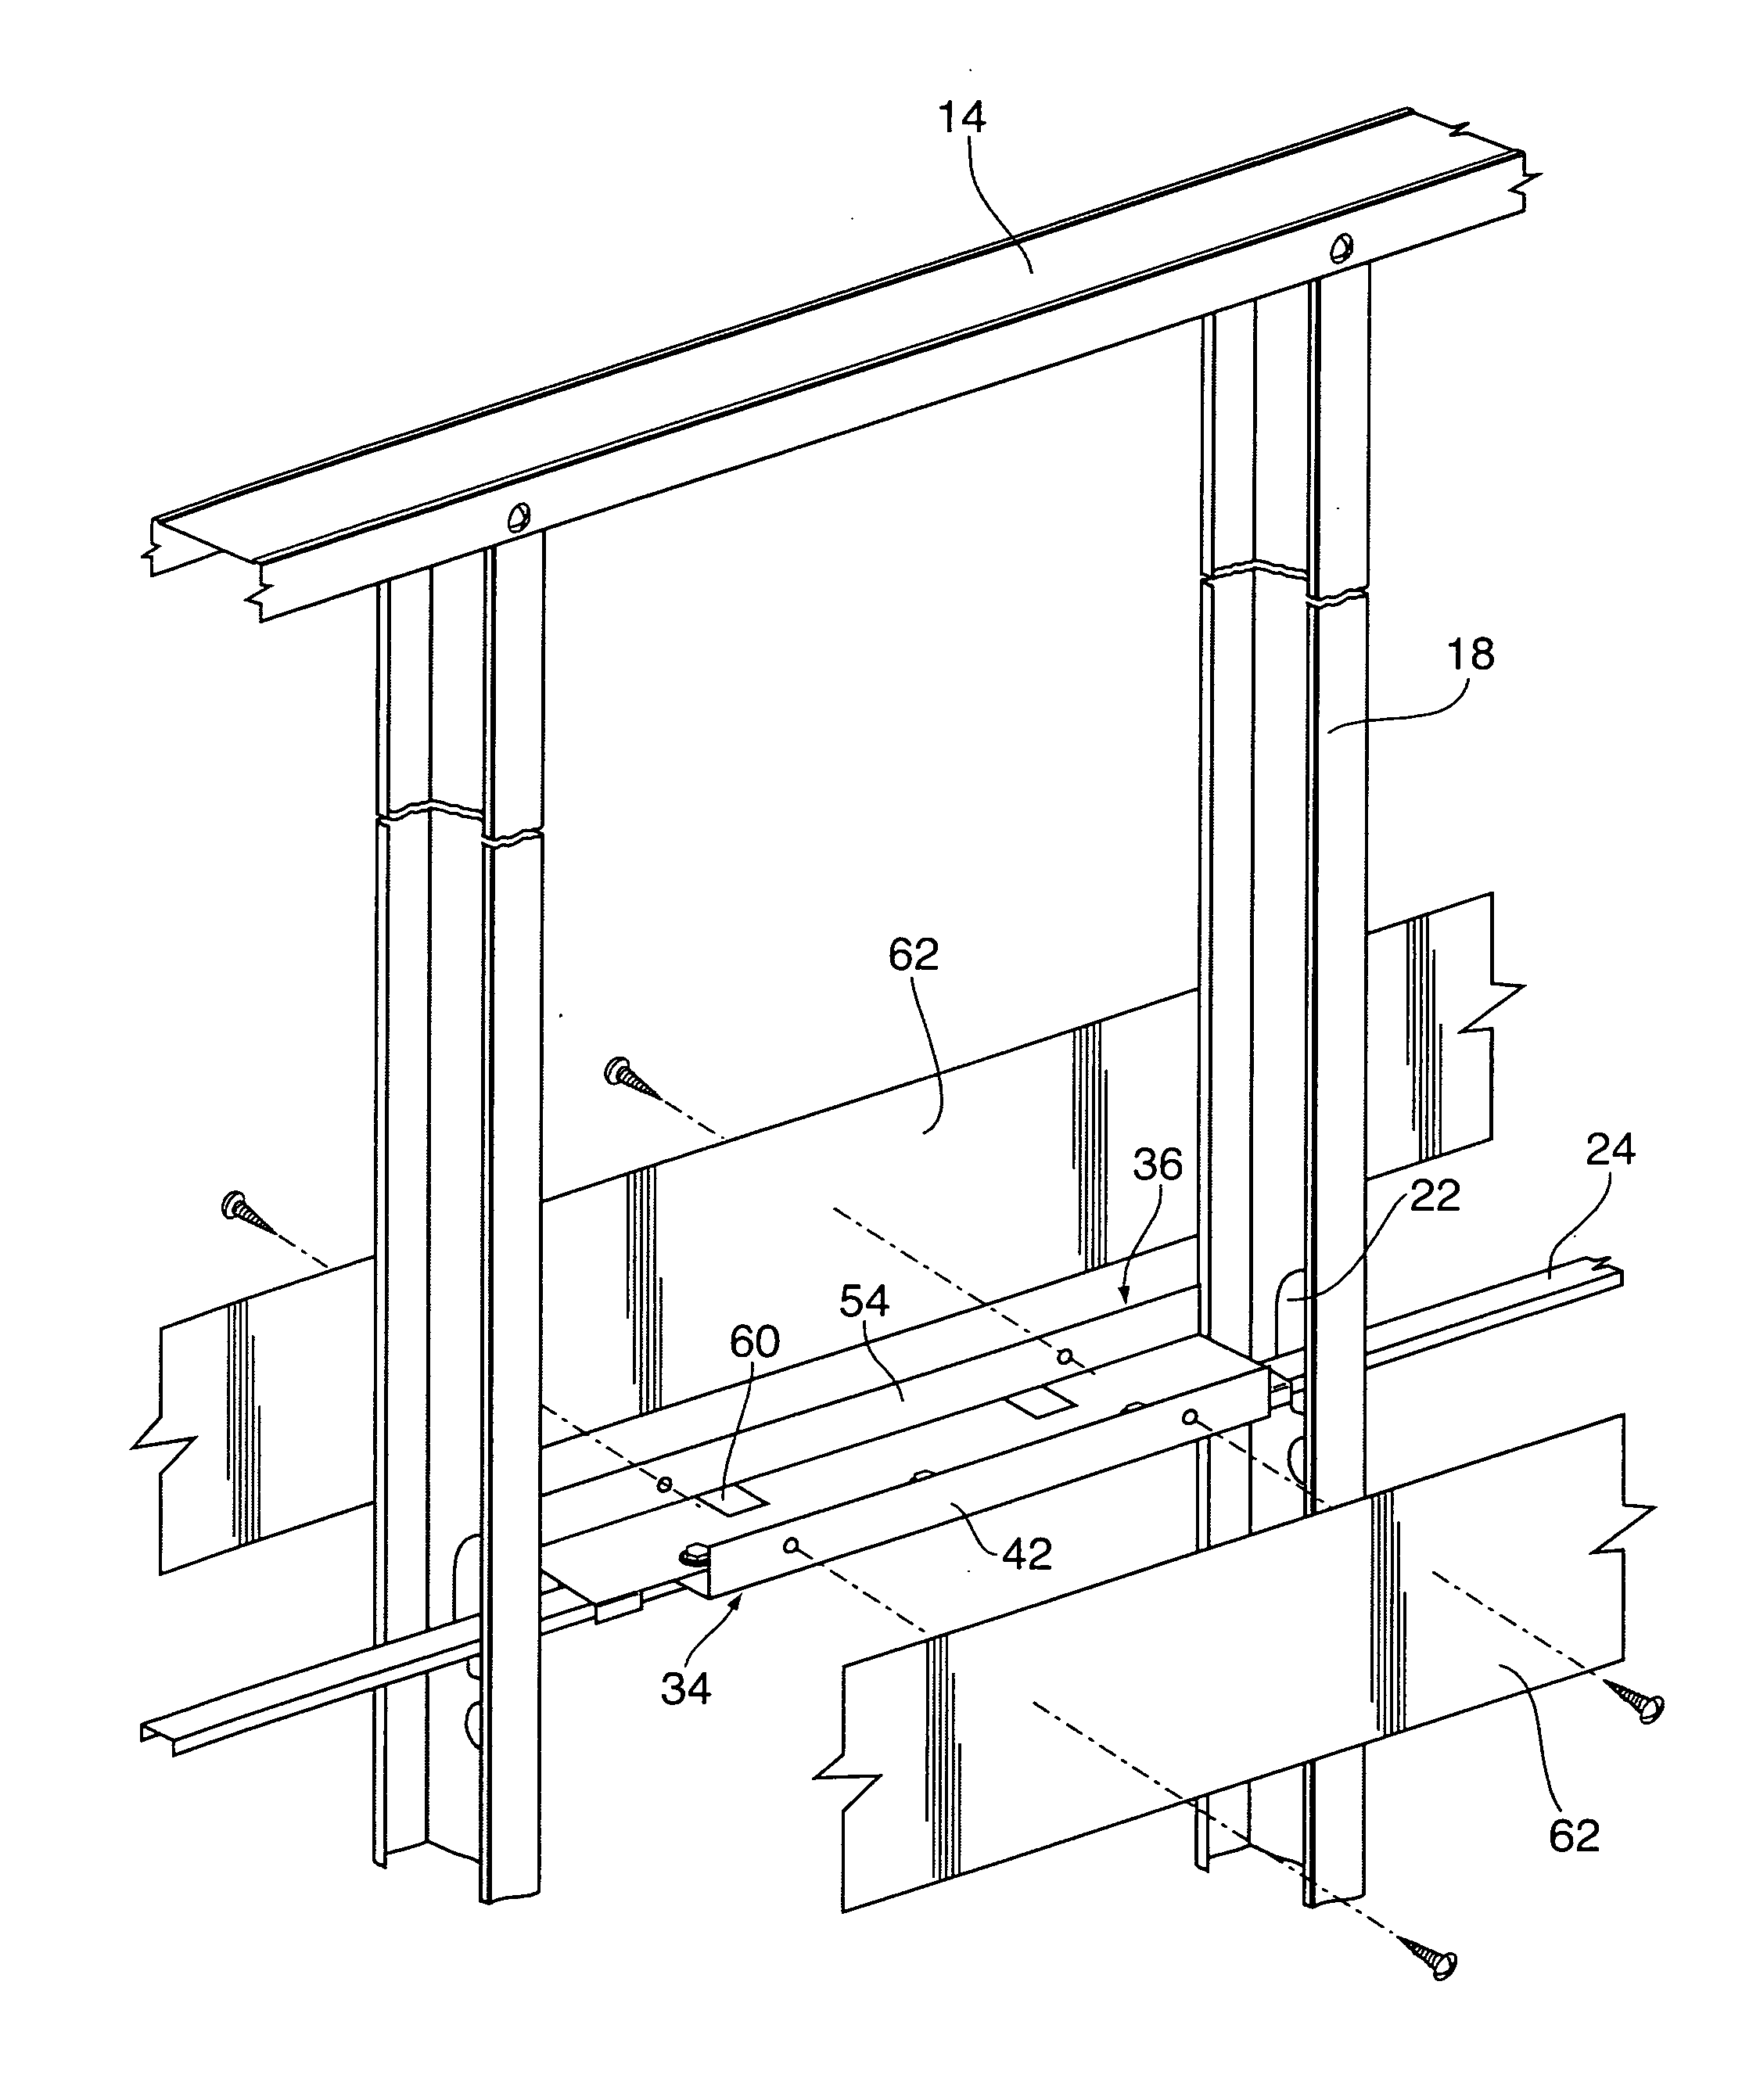 Load supporting blocking member for use in a metal stud wall